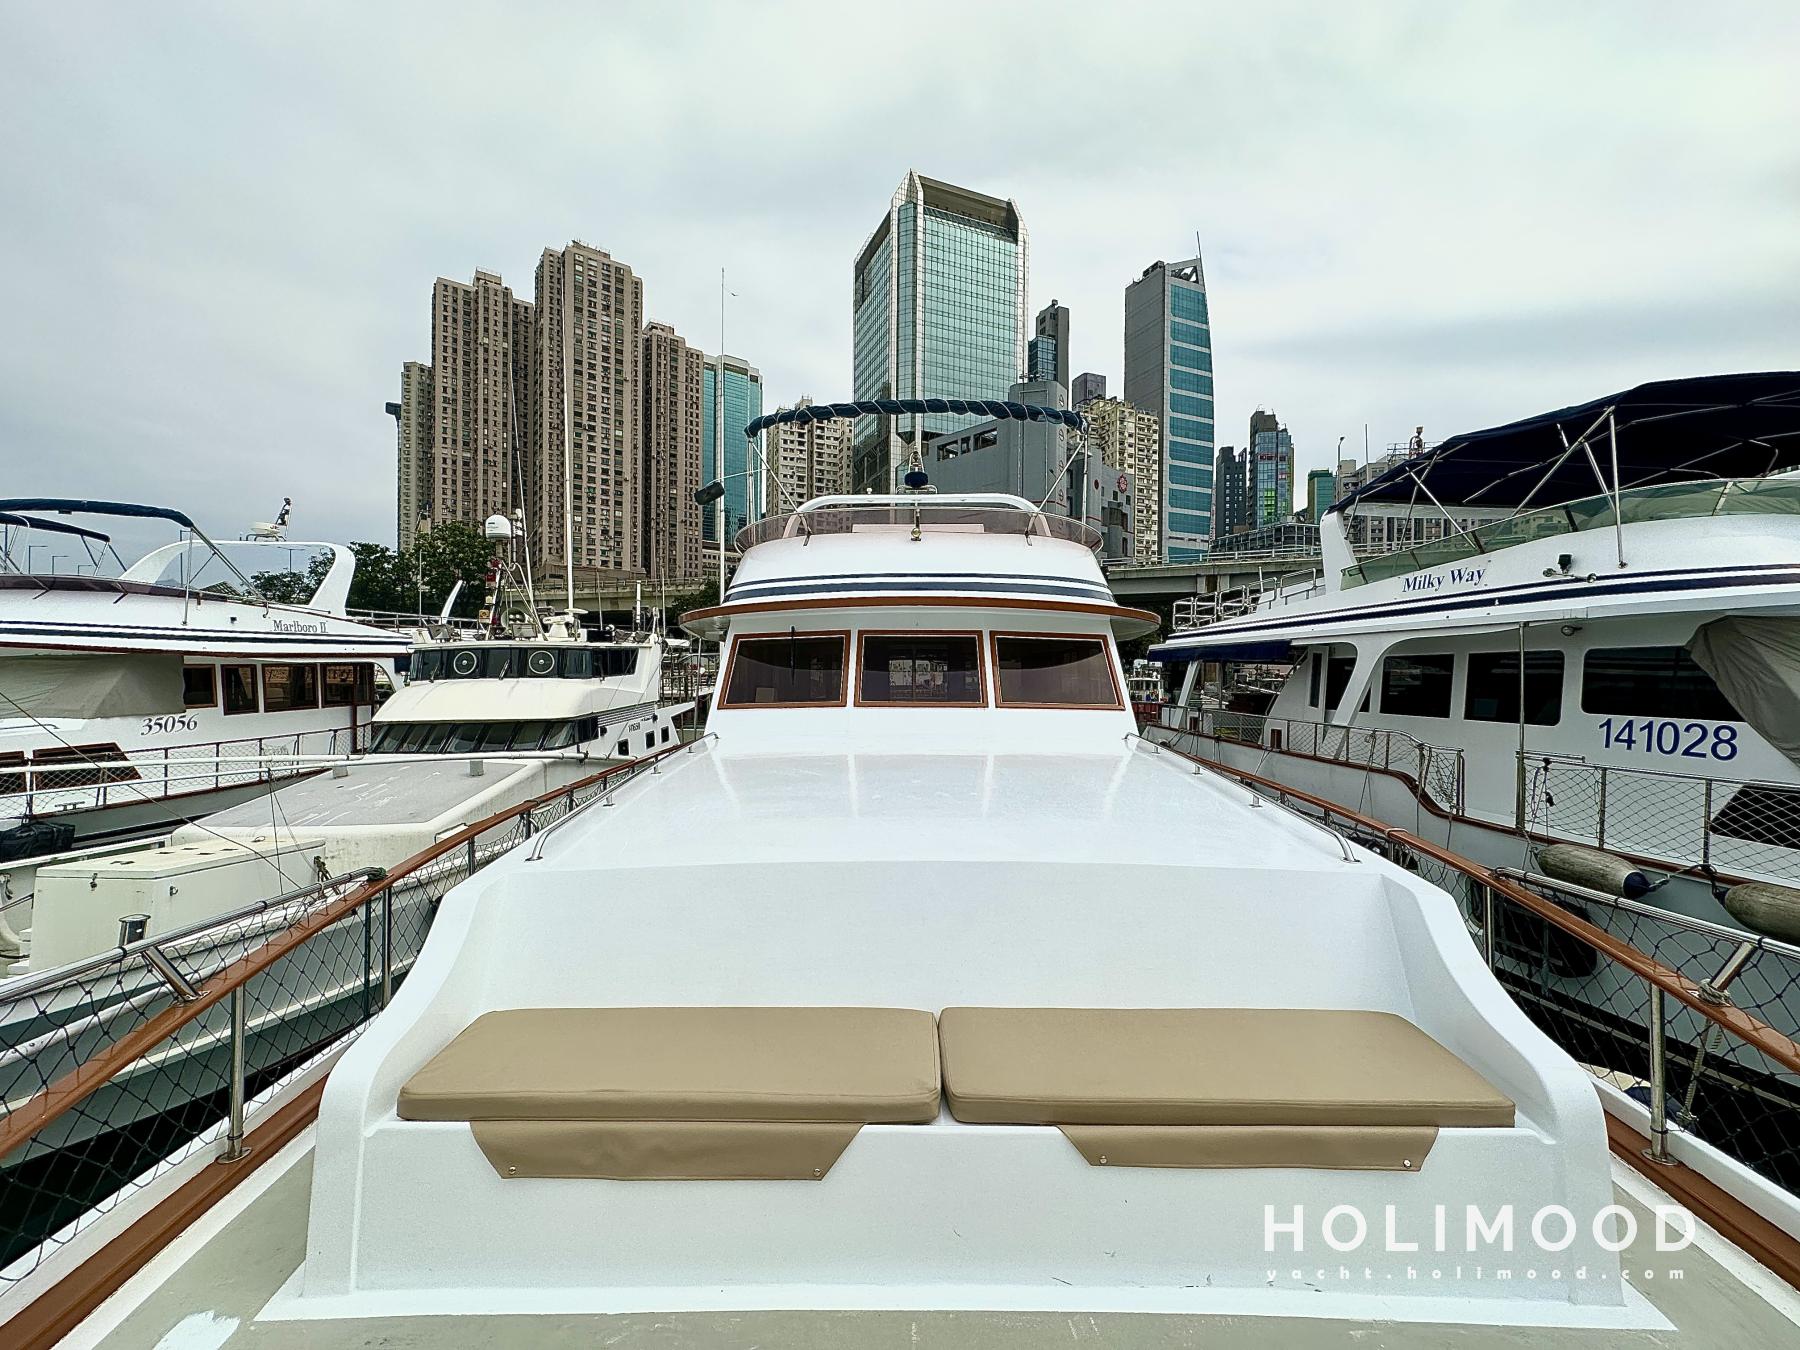 CK01 Quality Classic Junk boat| Victoria Harbour pick up & drop off| Experienced Captains 9